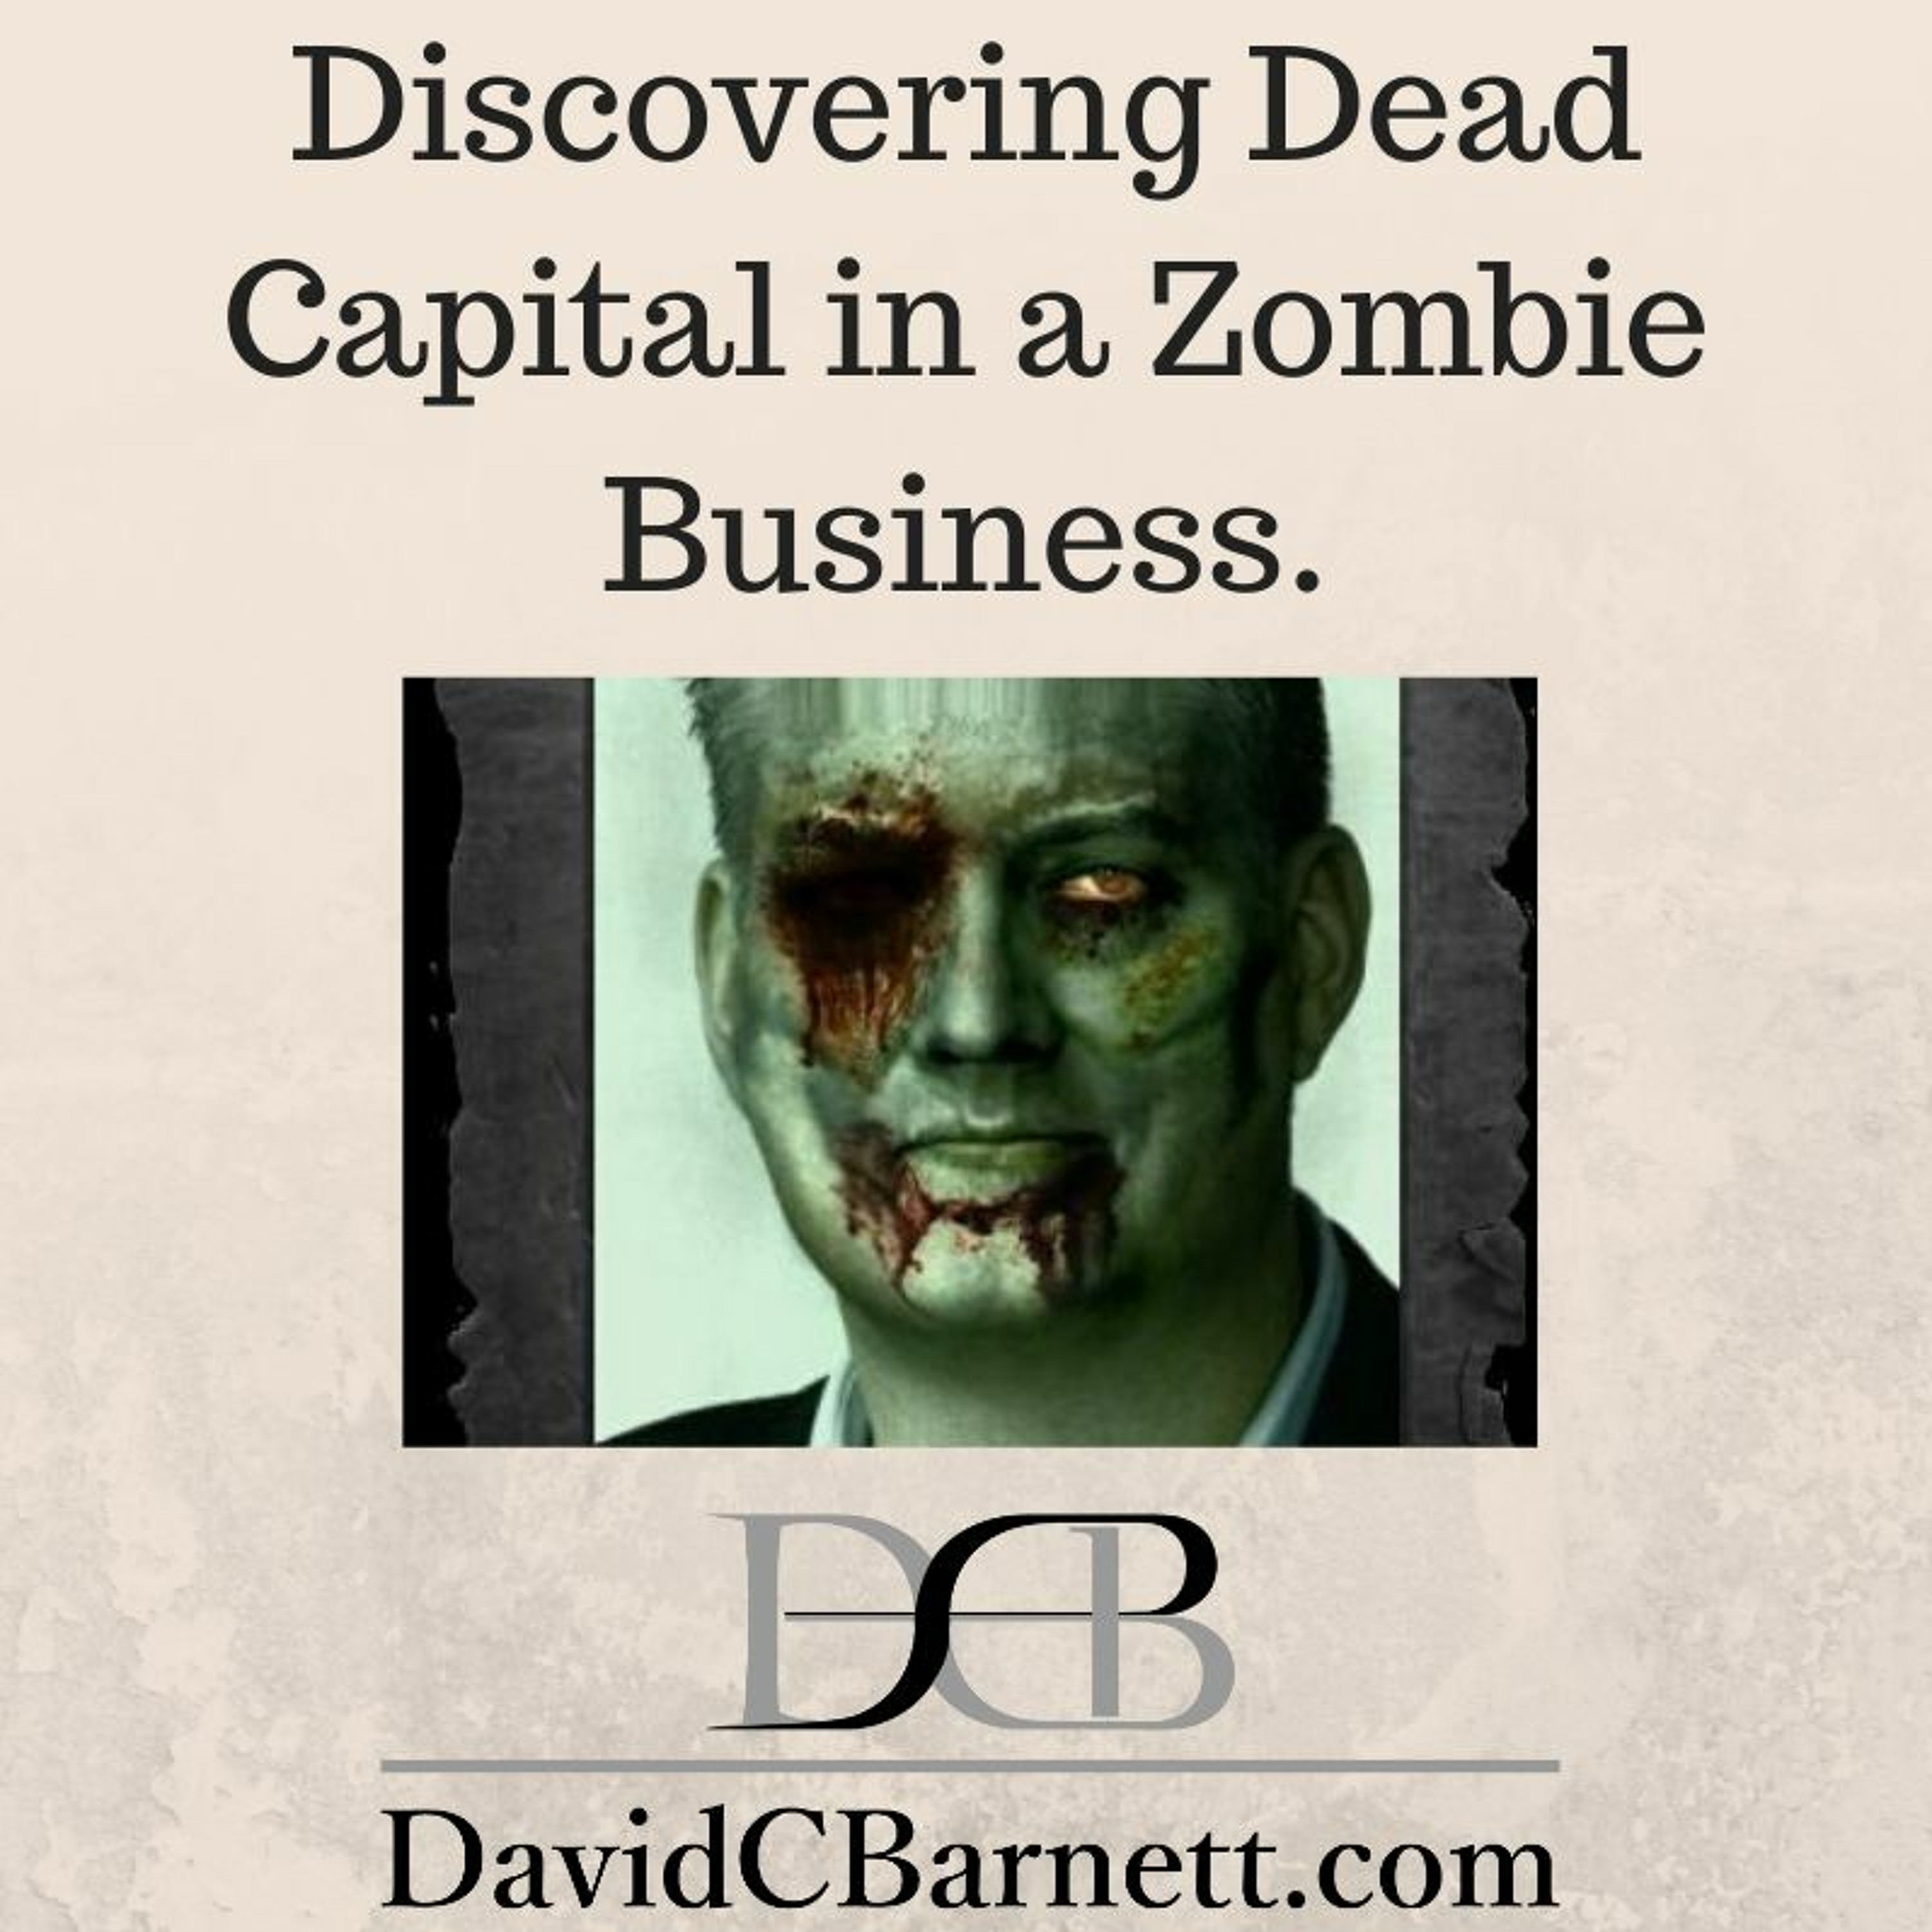 Zombie Businesses, Zombie Capital, Dead Capital walking around- Business Valuation